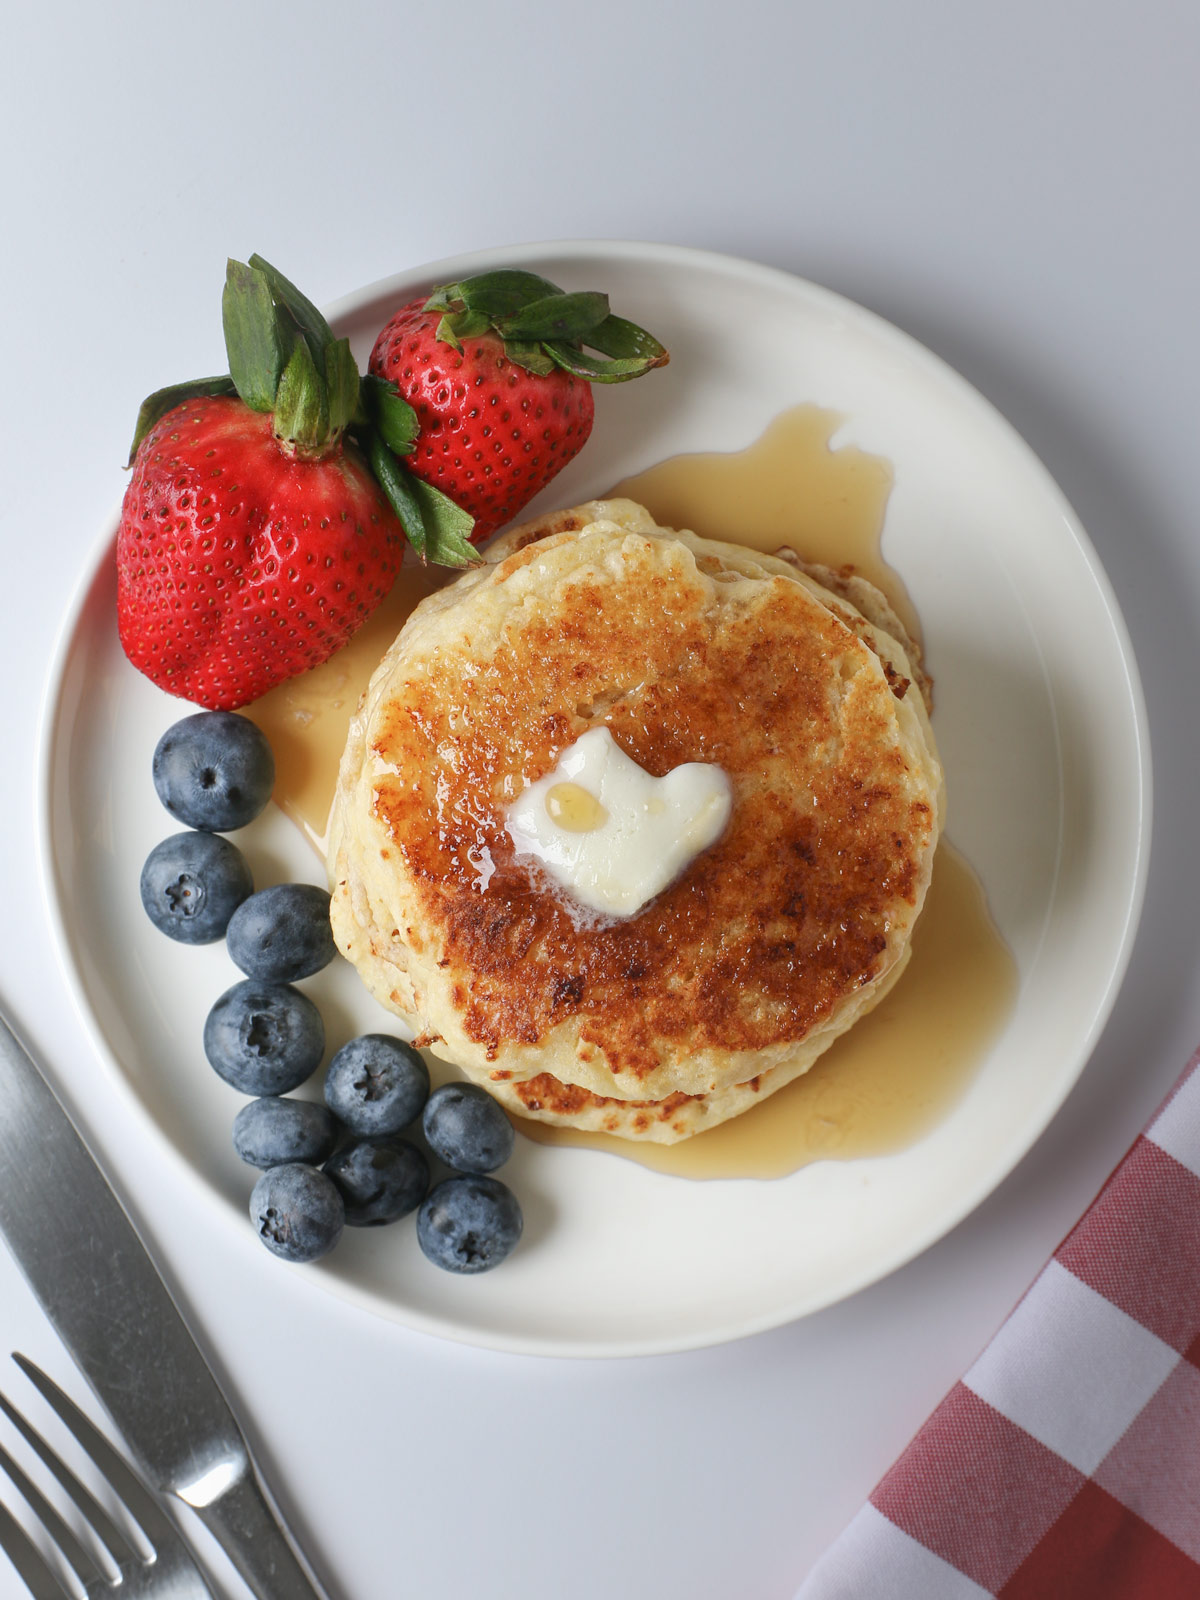 stack of pancakes on white plate with berries, near a red checked napkin with flatware.